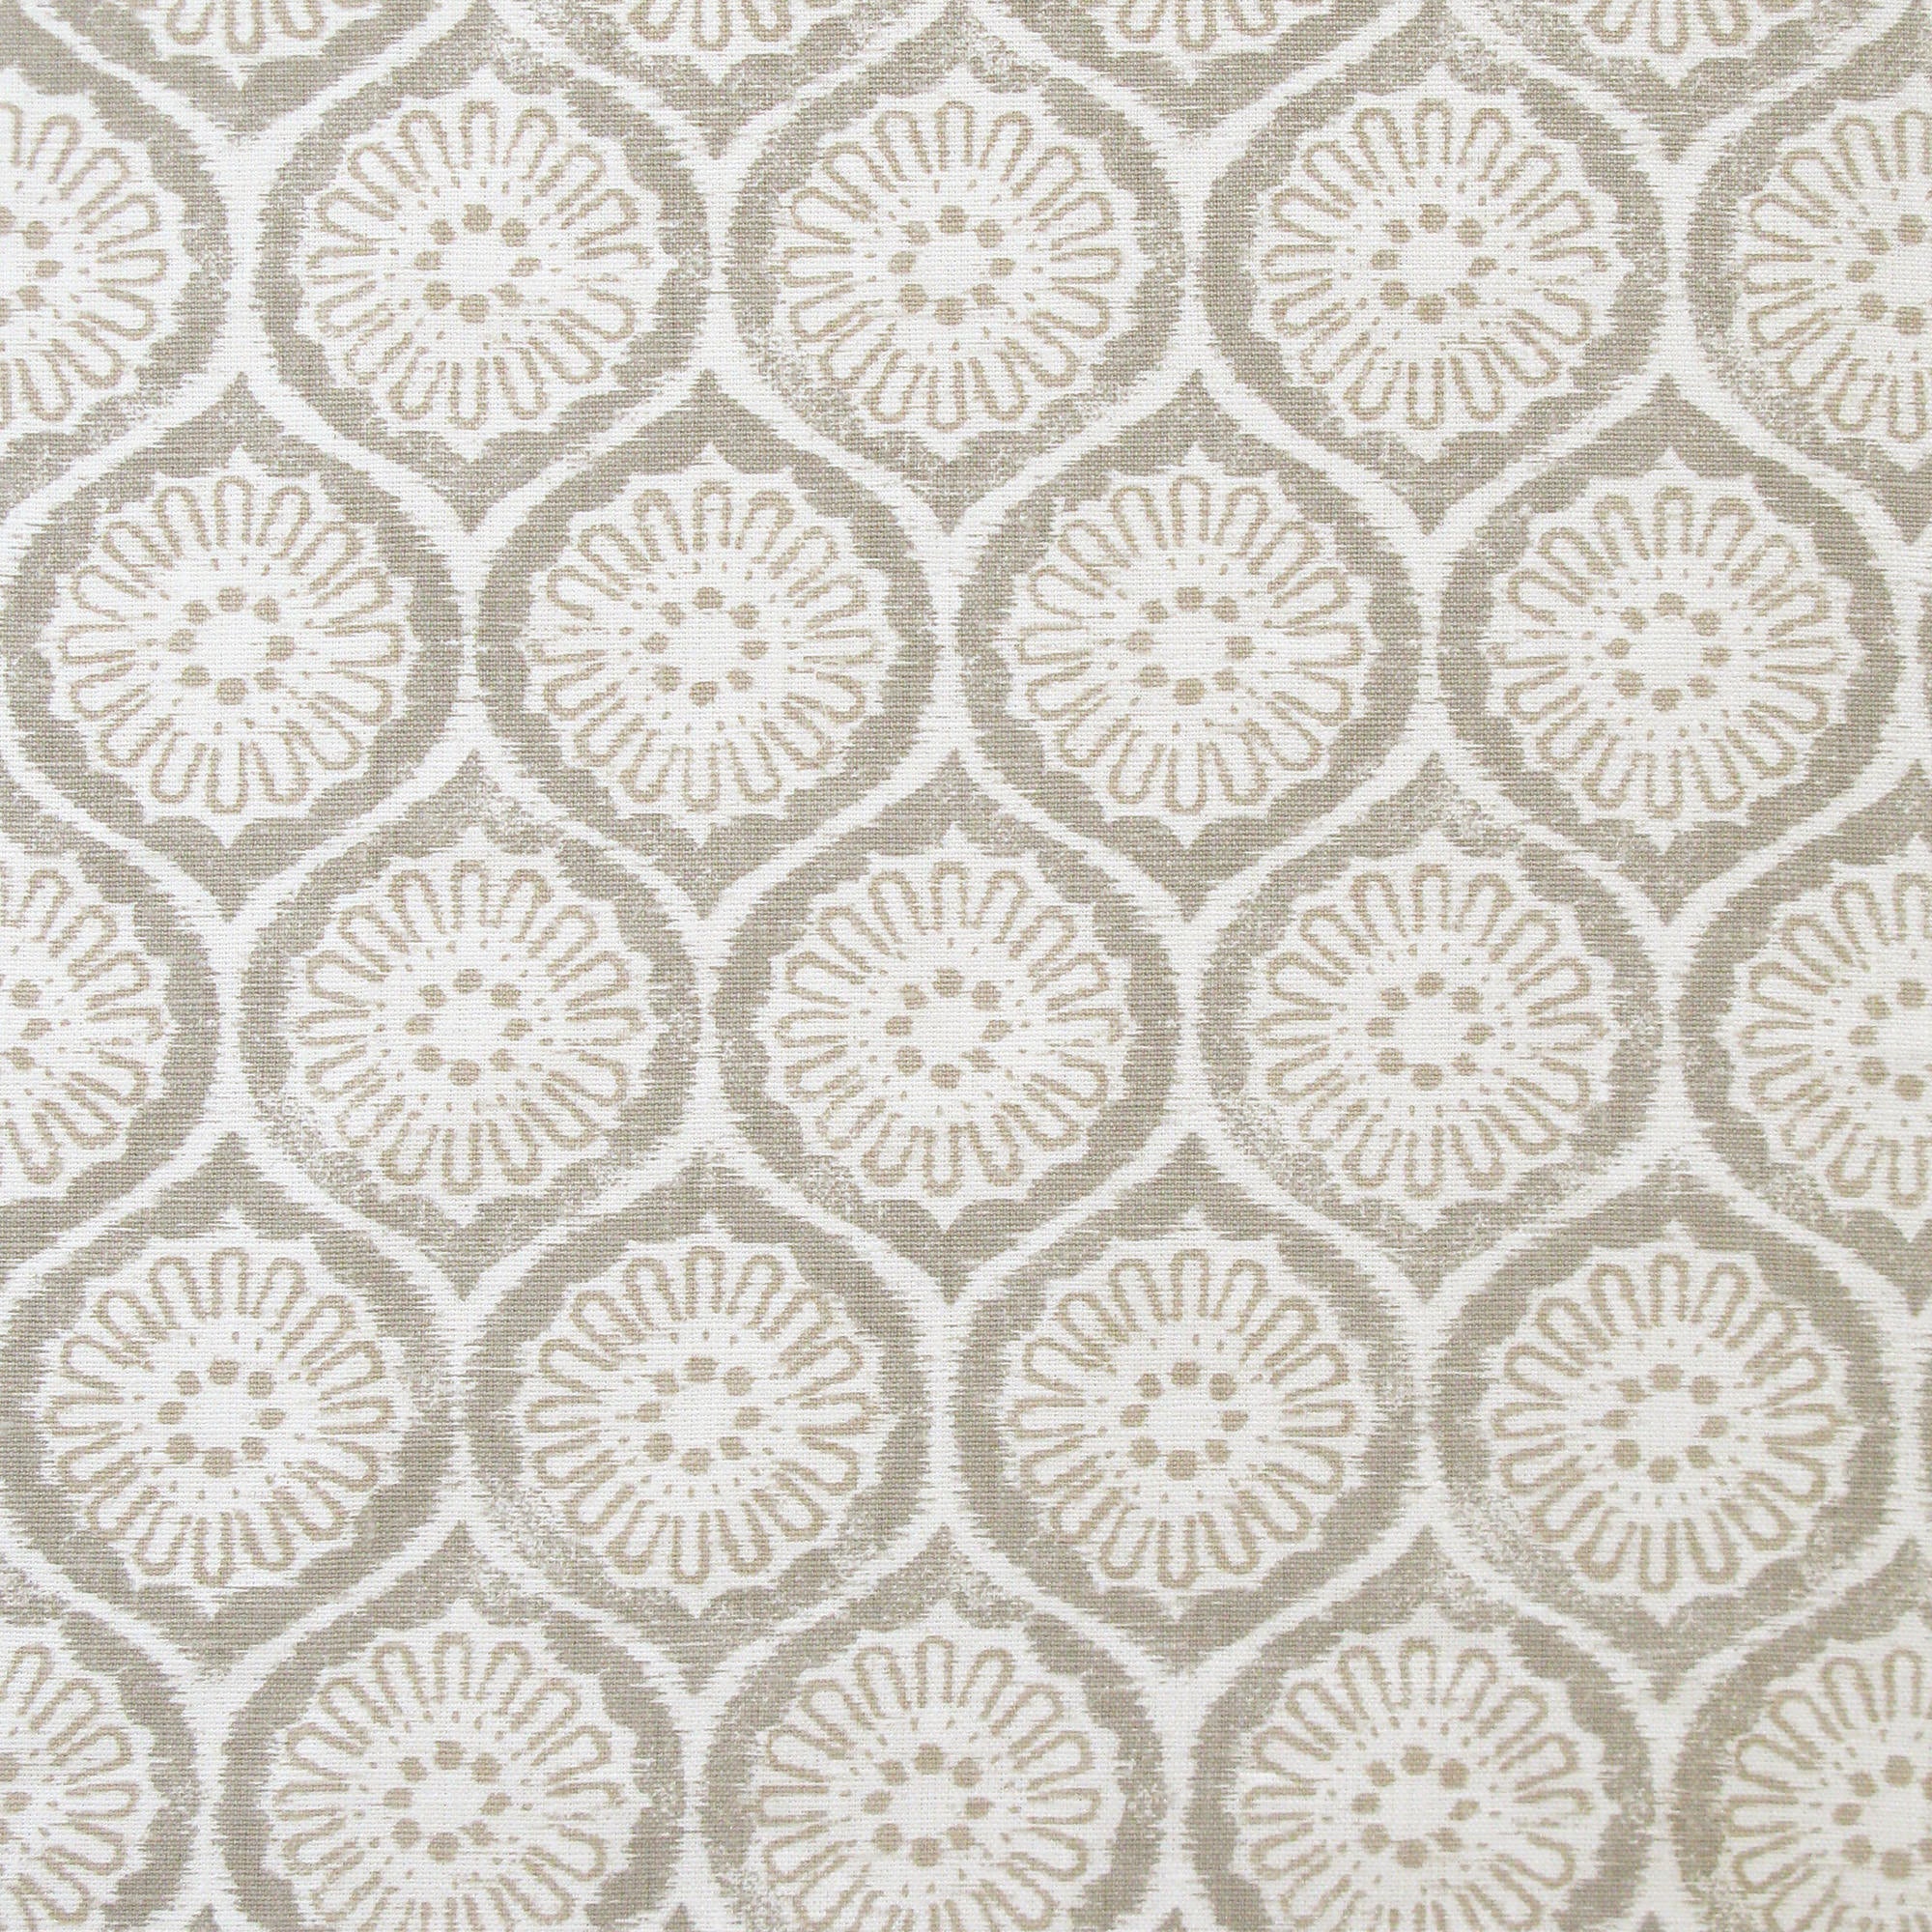 Detail of fabric in a floral lattice print in white and cream on a tan field.